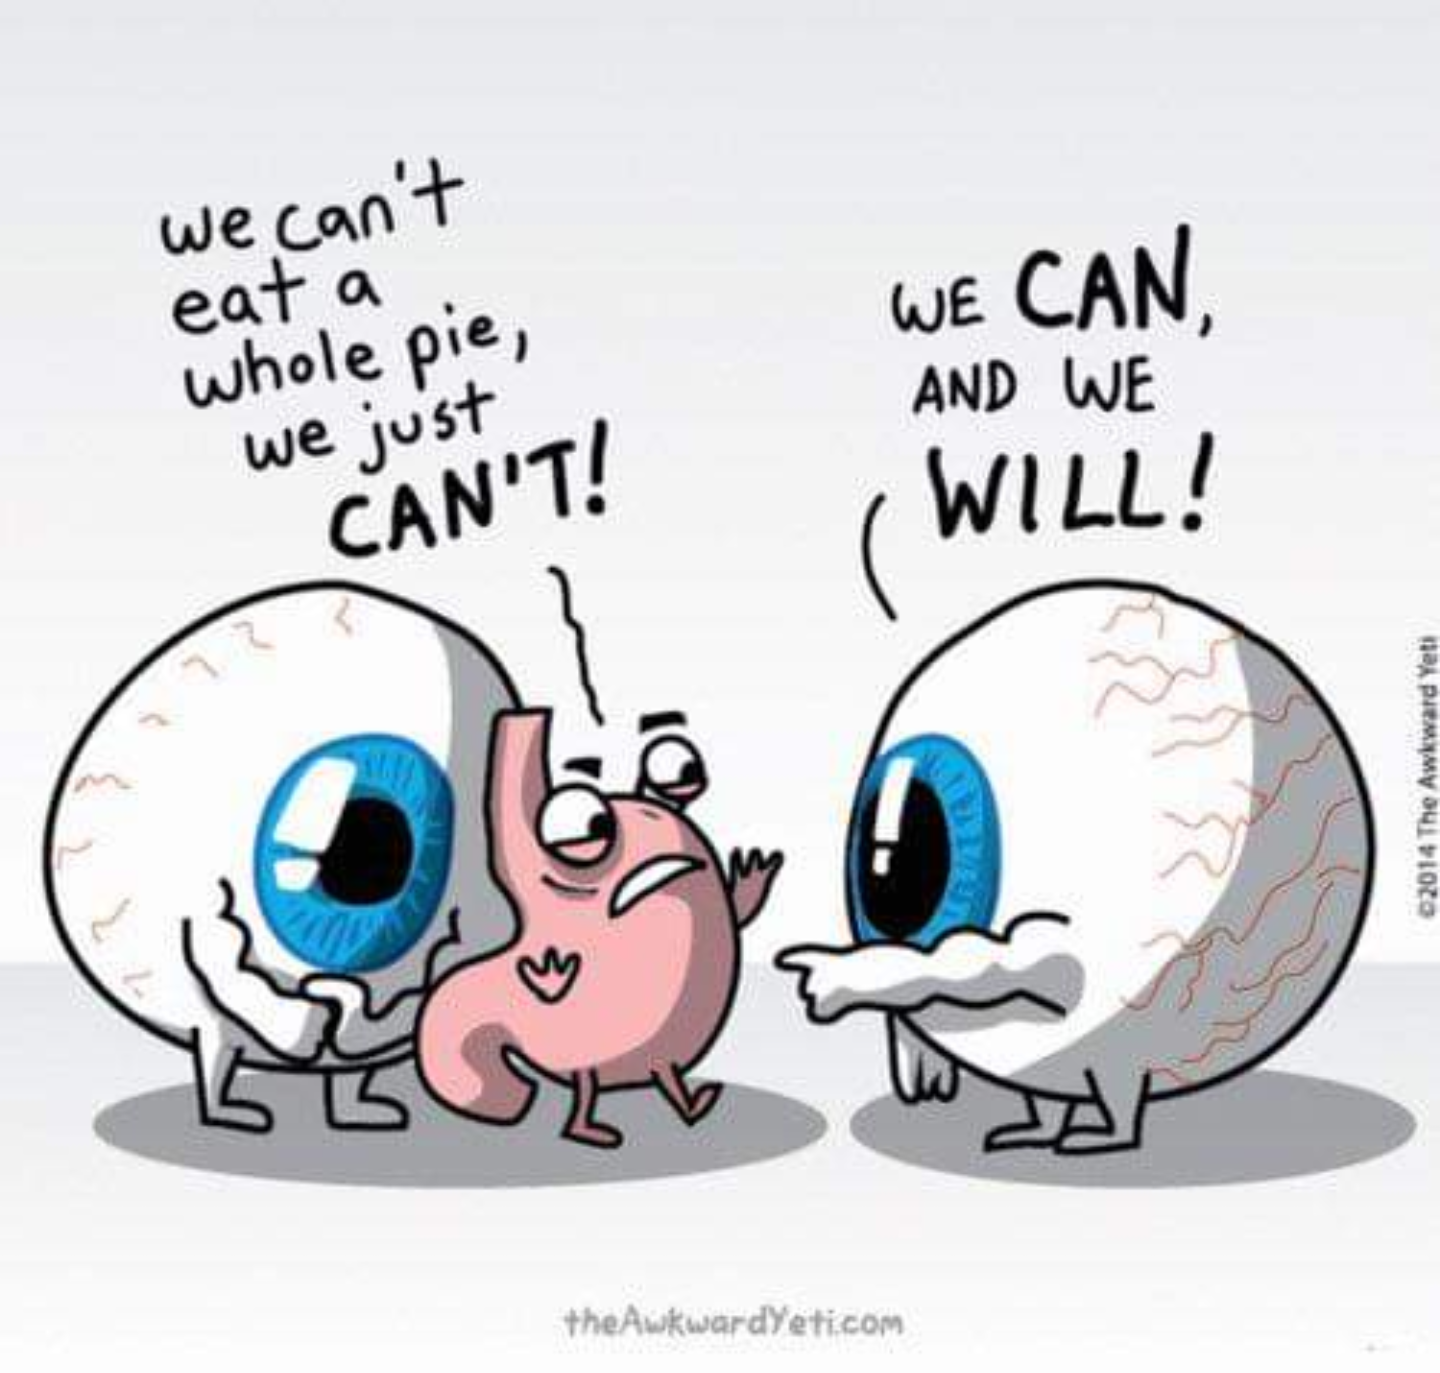 eyes bigger than stomach meme - we can't whole pie, we just eat a We And We Can Will! Can'T! 2014 The Awkward Yeti the Awkwardyeti.com